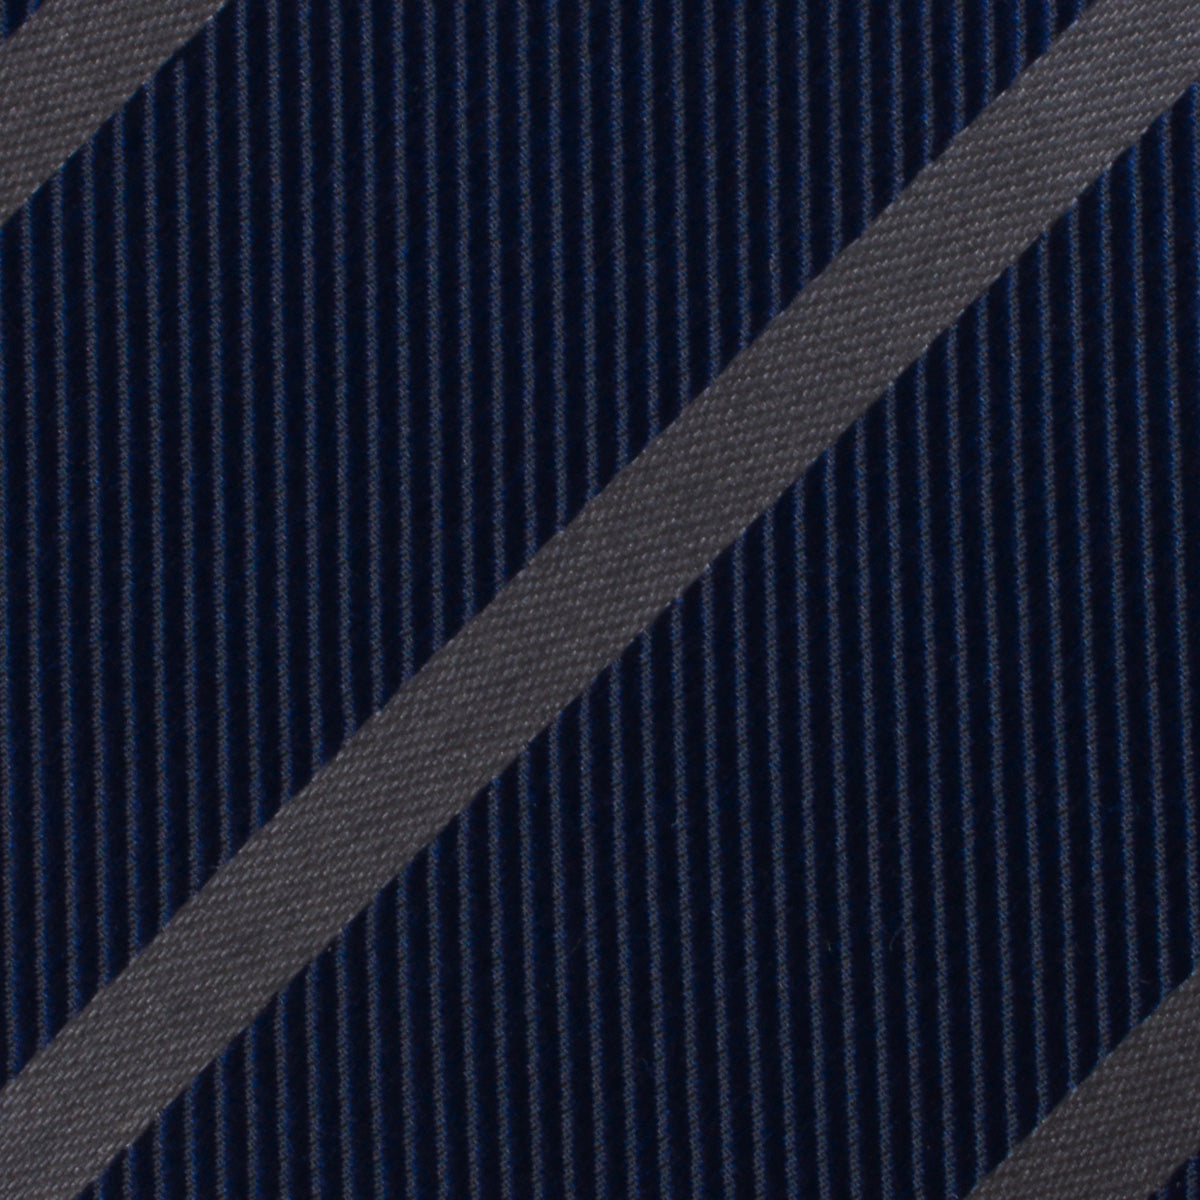 Charcoal Grey Striped Bow Tie Fabric